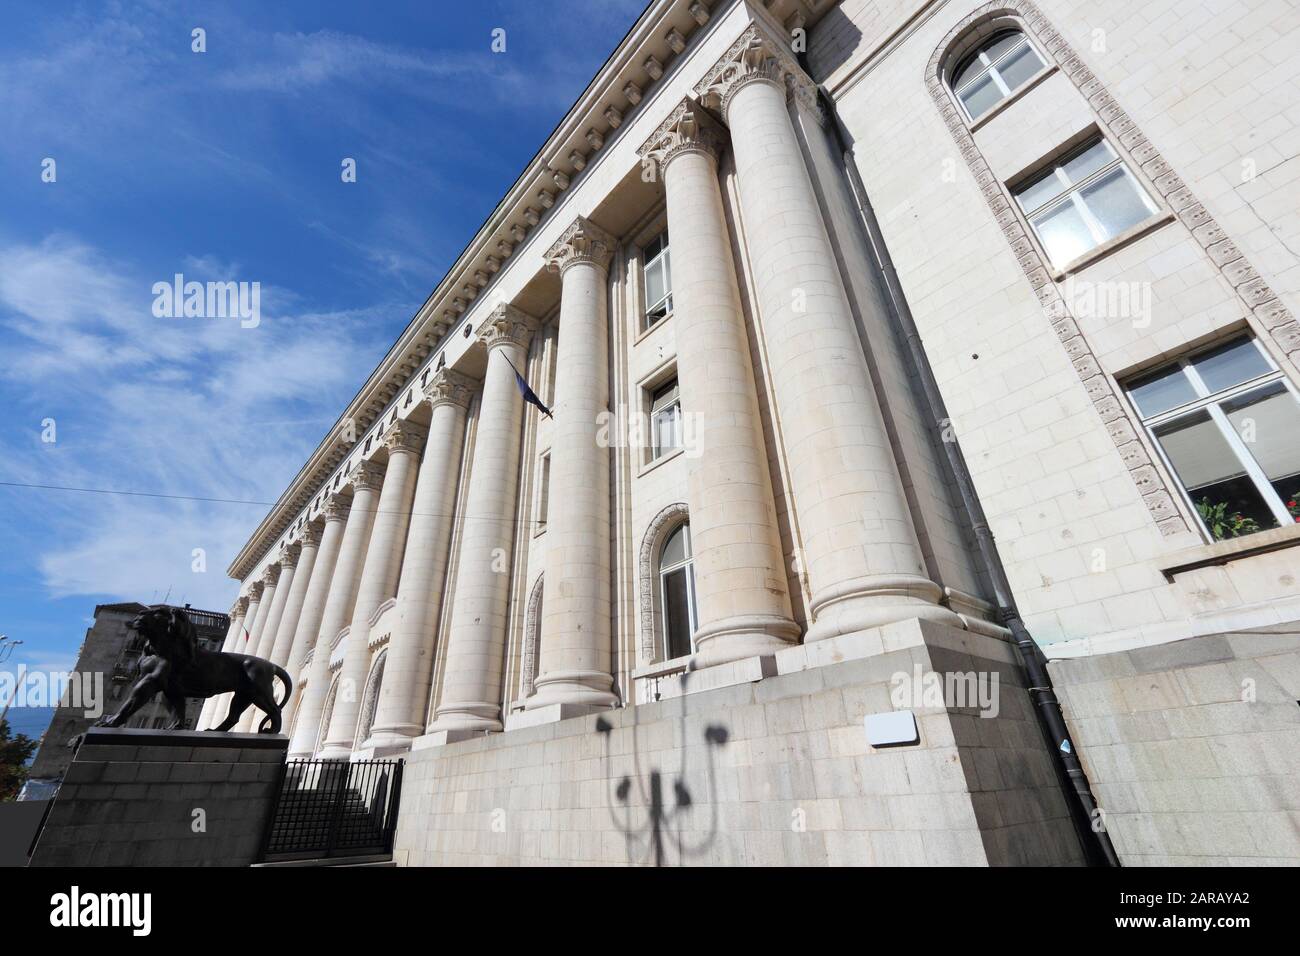 Courthouse in Sofia, Bulgaria - Palace of Justice. Stock Photo